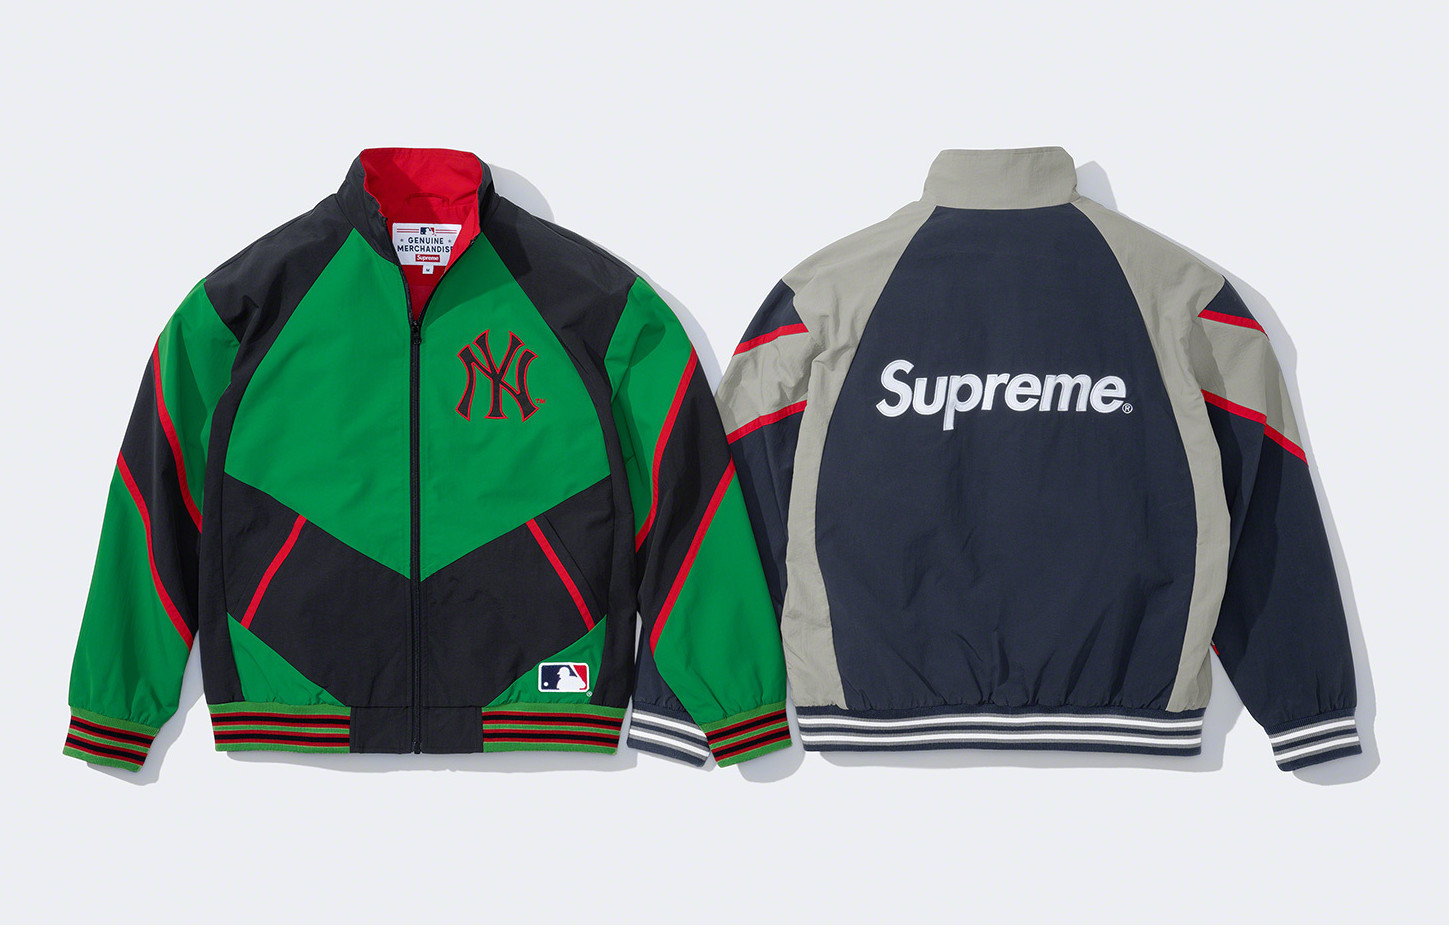 SUPREME NY YANKEES JACKET GORE TEX 700 Fill - GREEN for Sale in